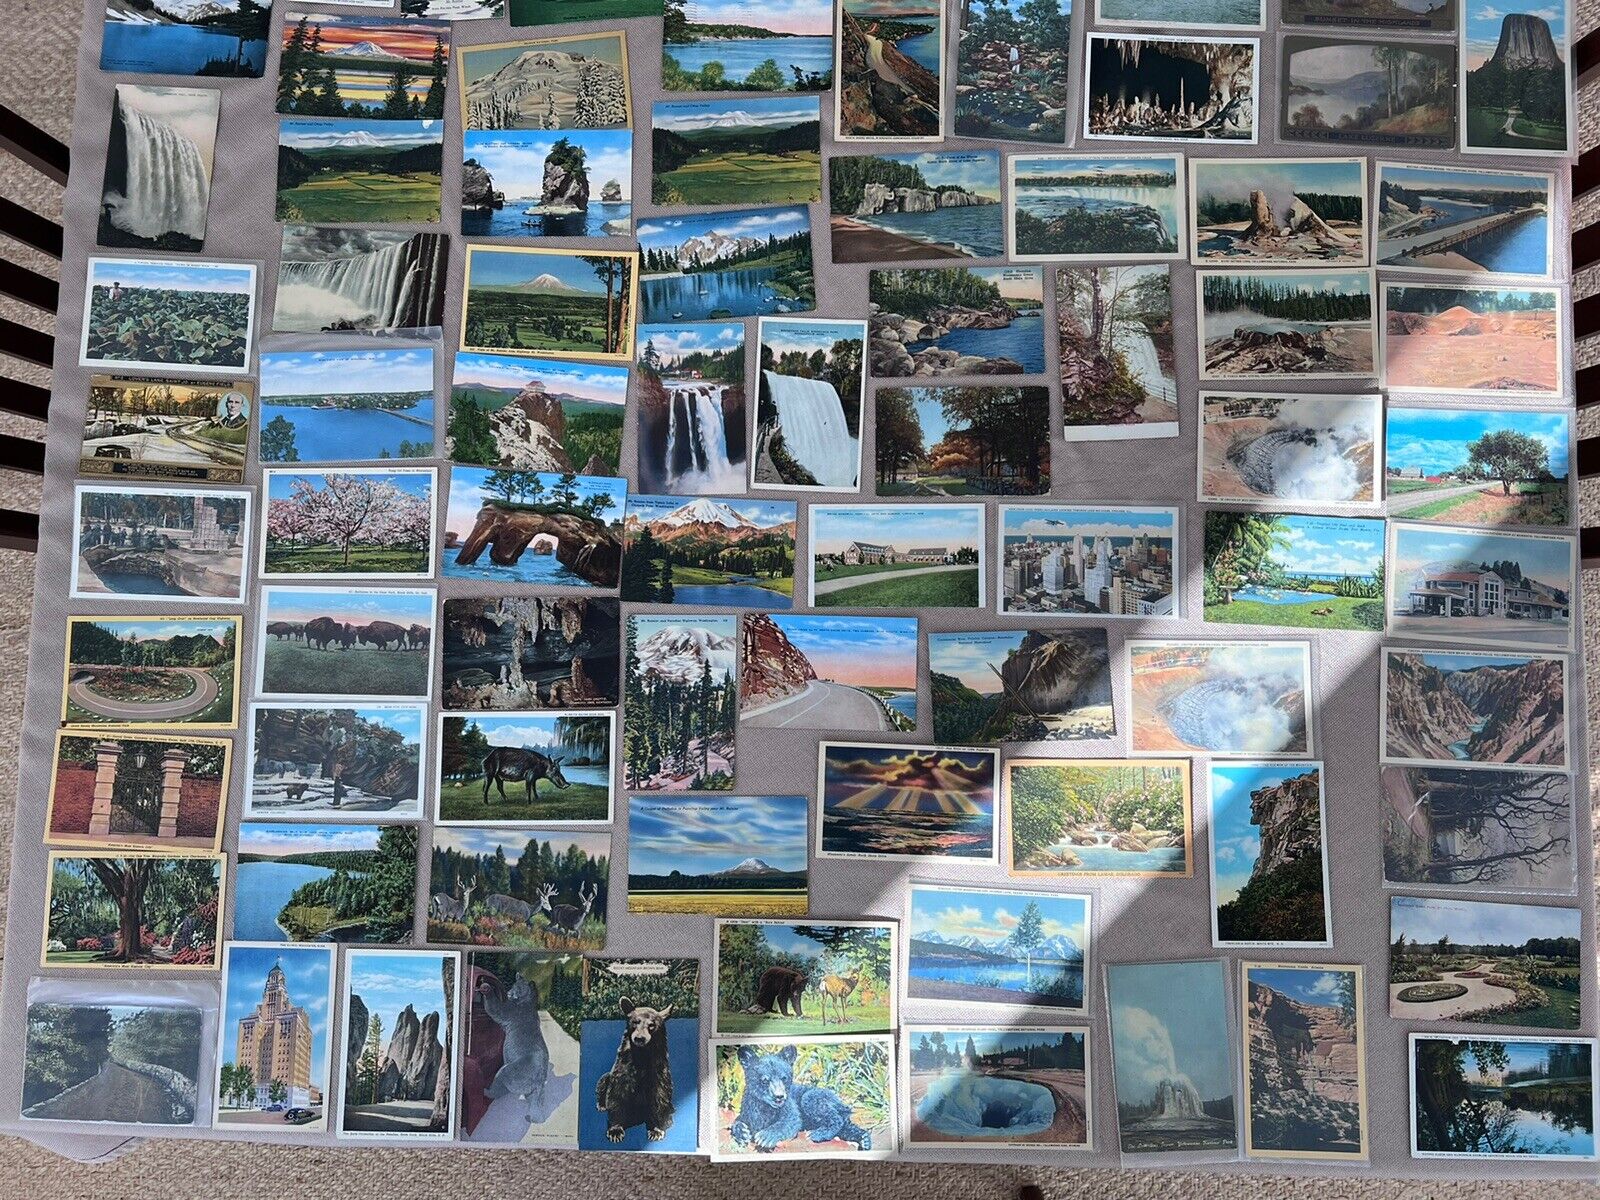 75 OLDER POSTCARDS COLORTONE STYLE MOSTLY NATURE SCENES & PARKS ANTIQUE TO 1950s